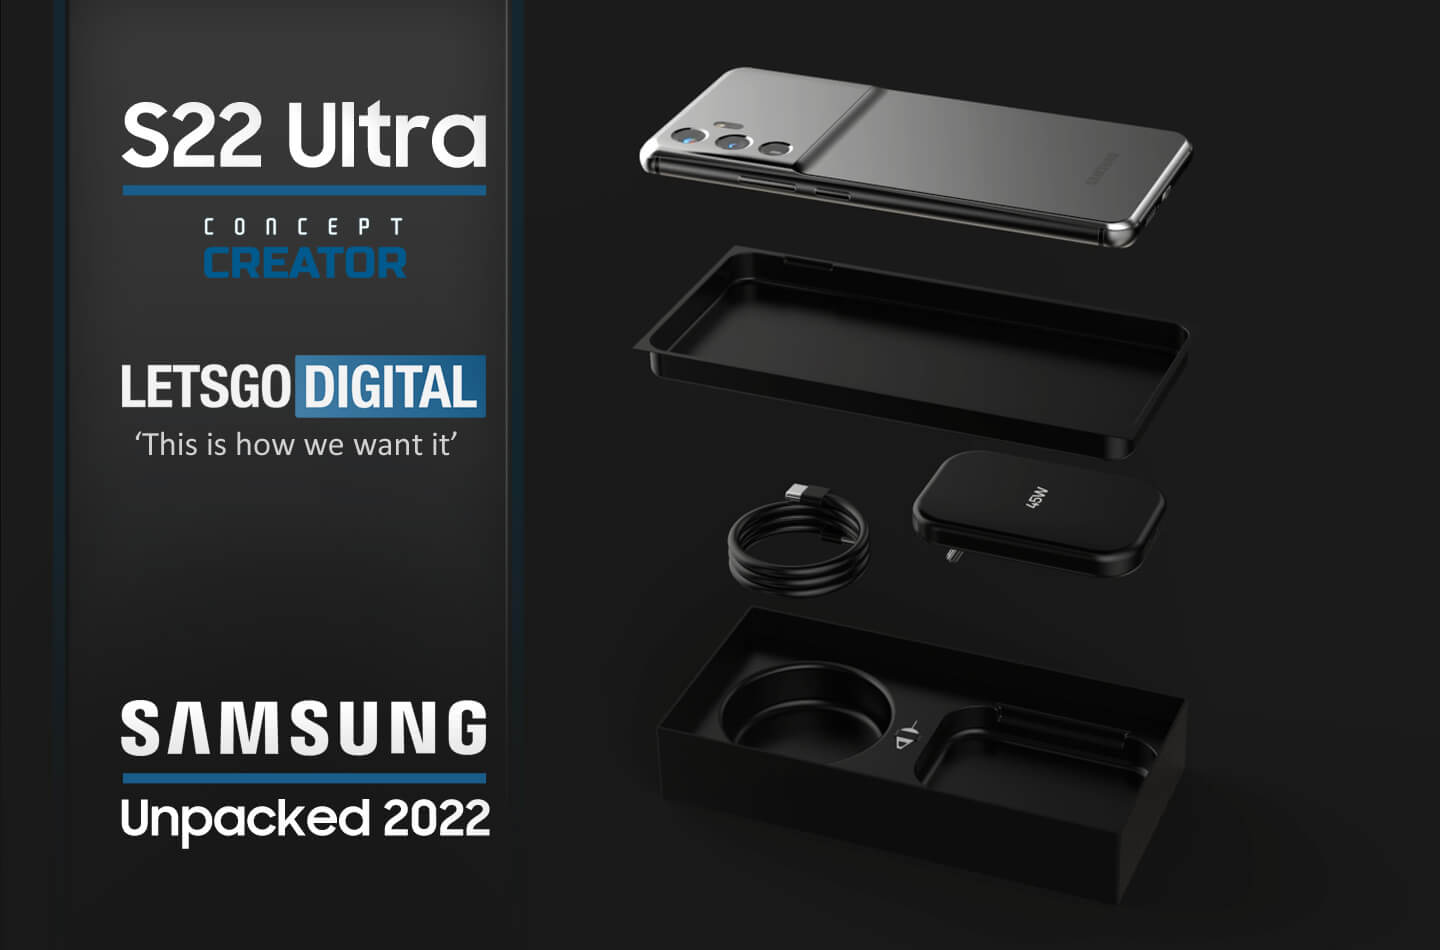 Not to jinx it: Samsung Galaxy S22 Ultra shown in renders with microSD slot, 3.5 mm jack and sub-screen camera